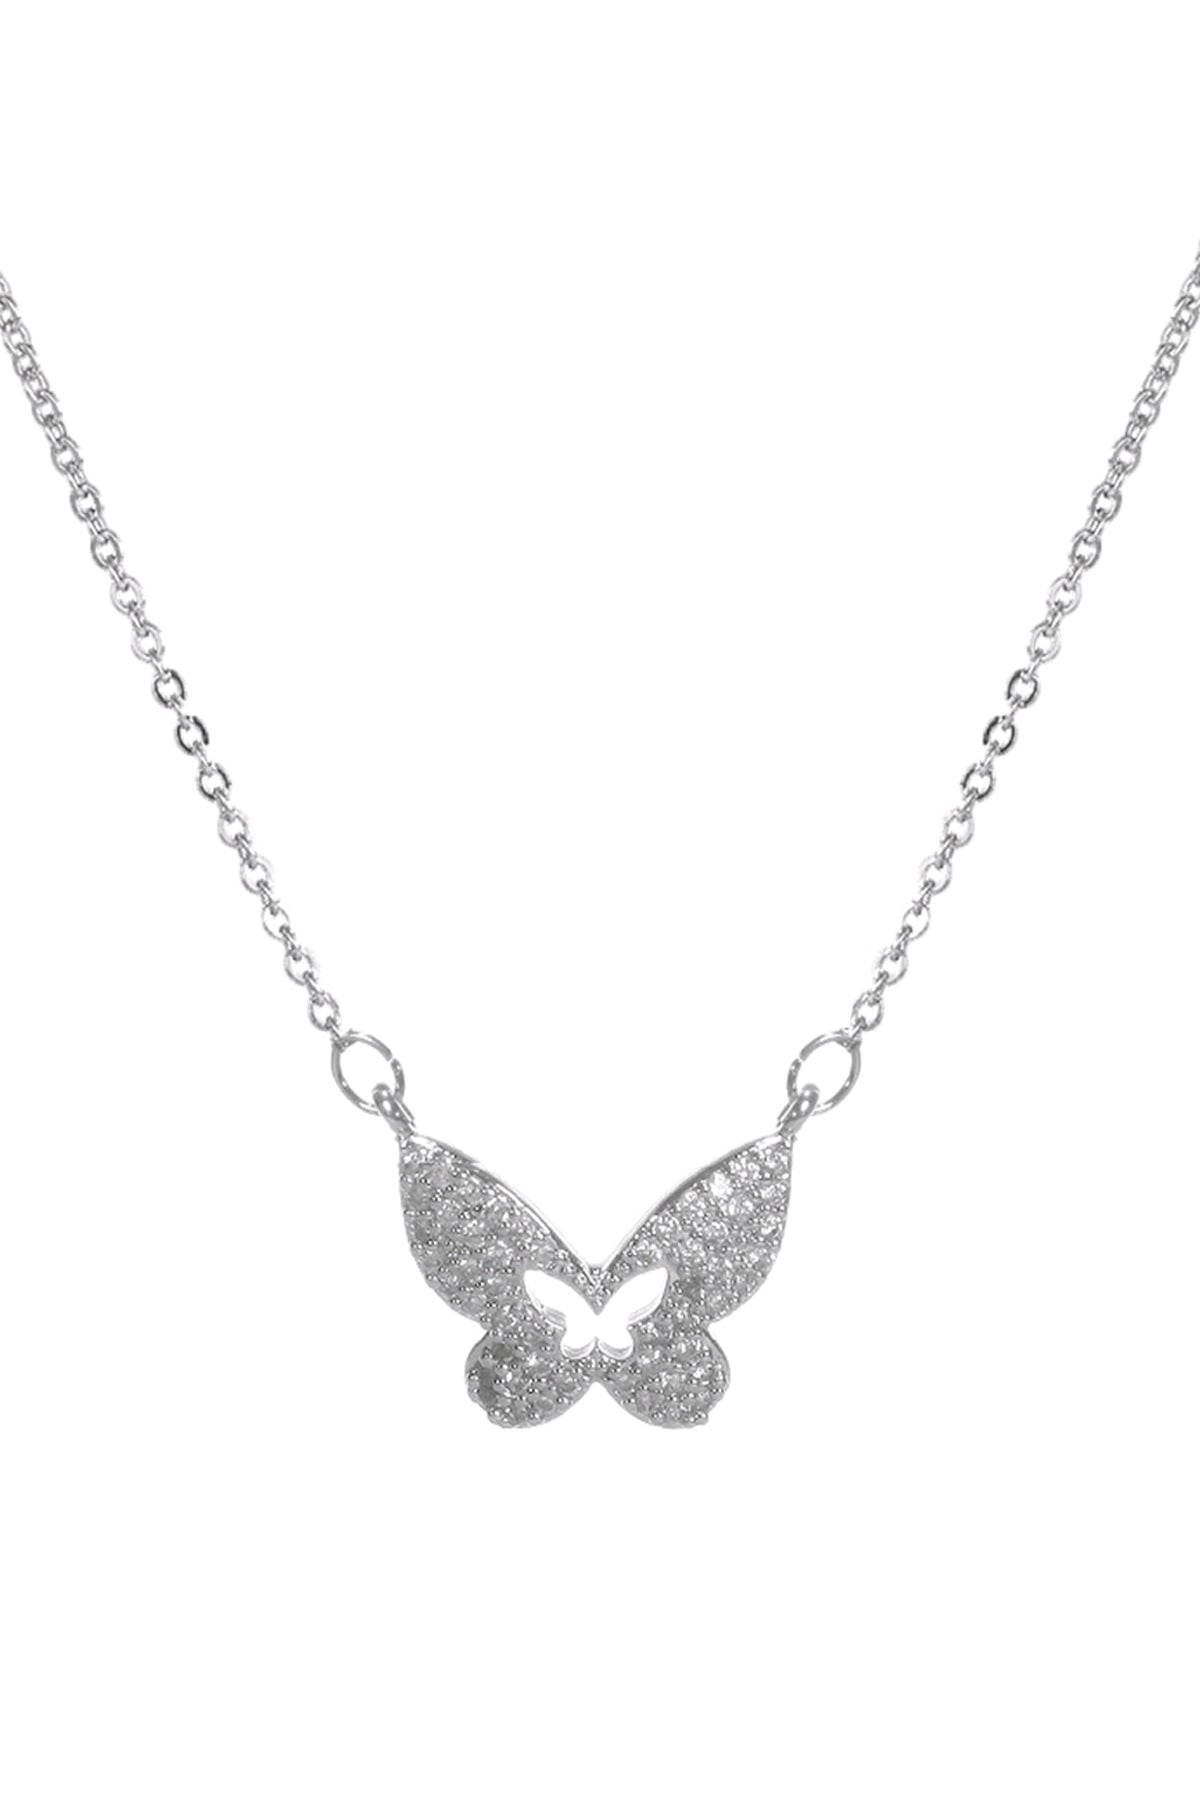 CUBIC ZIRCONIA HOLLOW MID BUTTERFLY NECKLACE